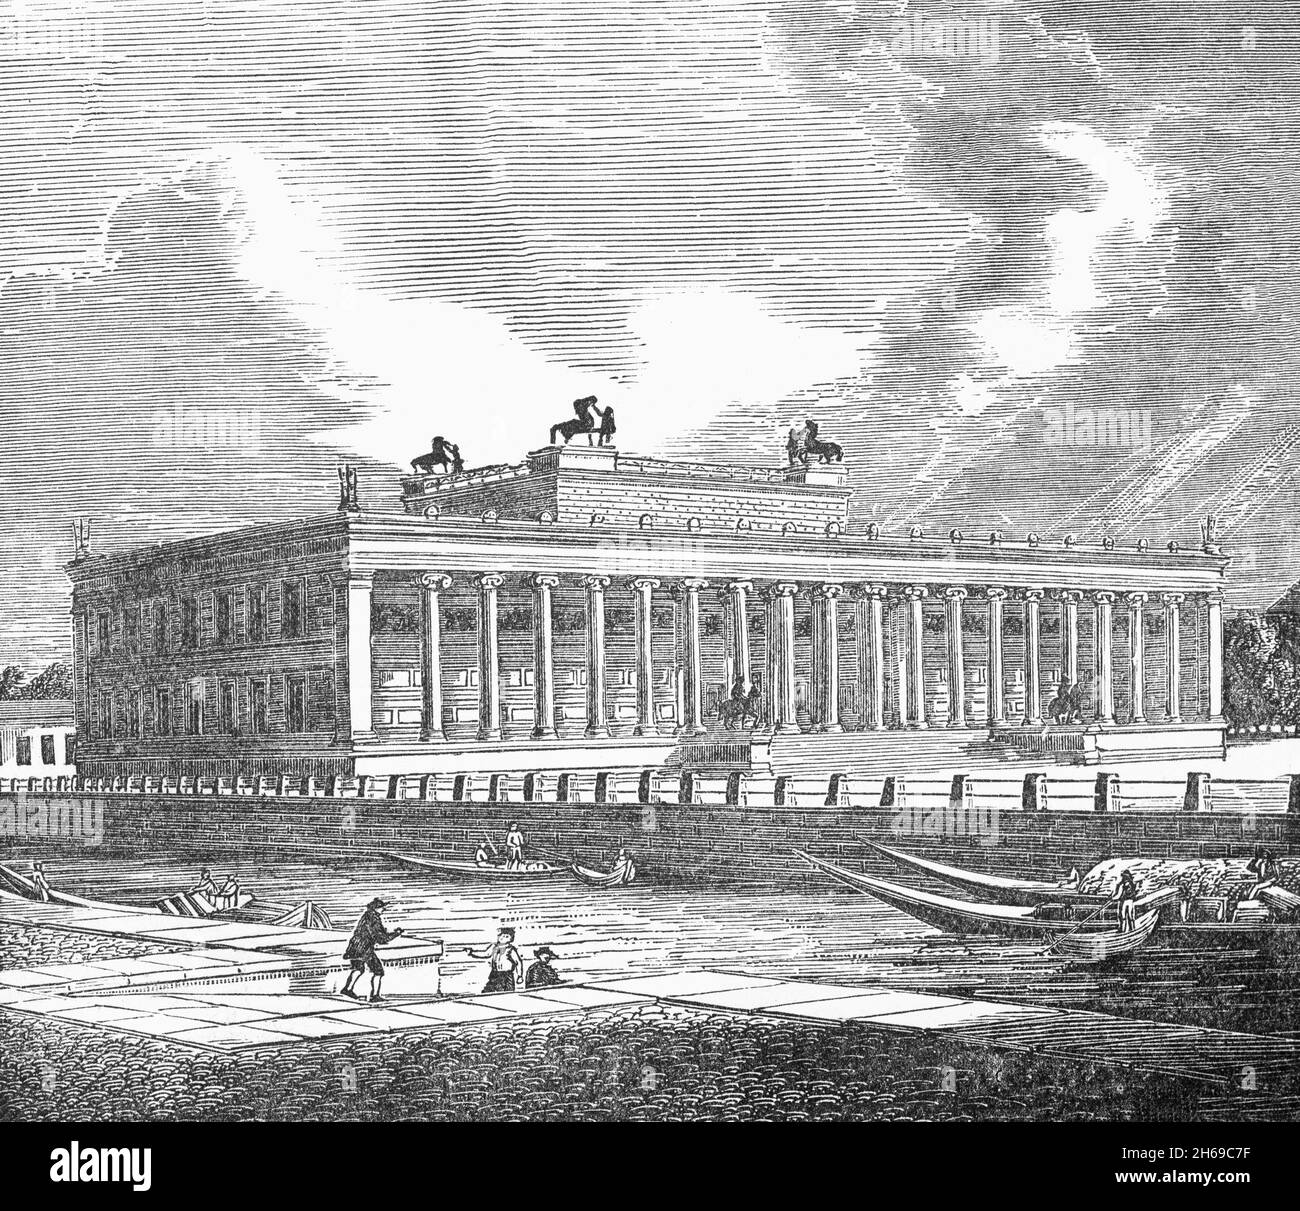 A late 19th Century illustration of the Altes Museum, a listed building on the Museum Island in the historic centre of Berlin and part of the UNESCO World Heritage. Built from 1825 to 1830  to plans by Karl Friedrich Schinkel, it is considered as a major work of German Neoclassical architecture. It was built by order of King Frederick William III of Prussia after the defeat of Napolean in 1815, when many of Germany's treasures were recovered from France. Stock Photo